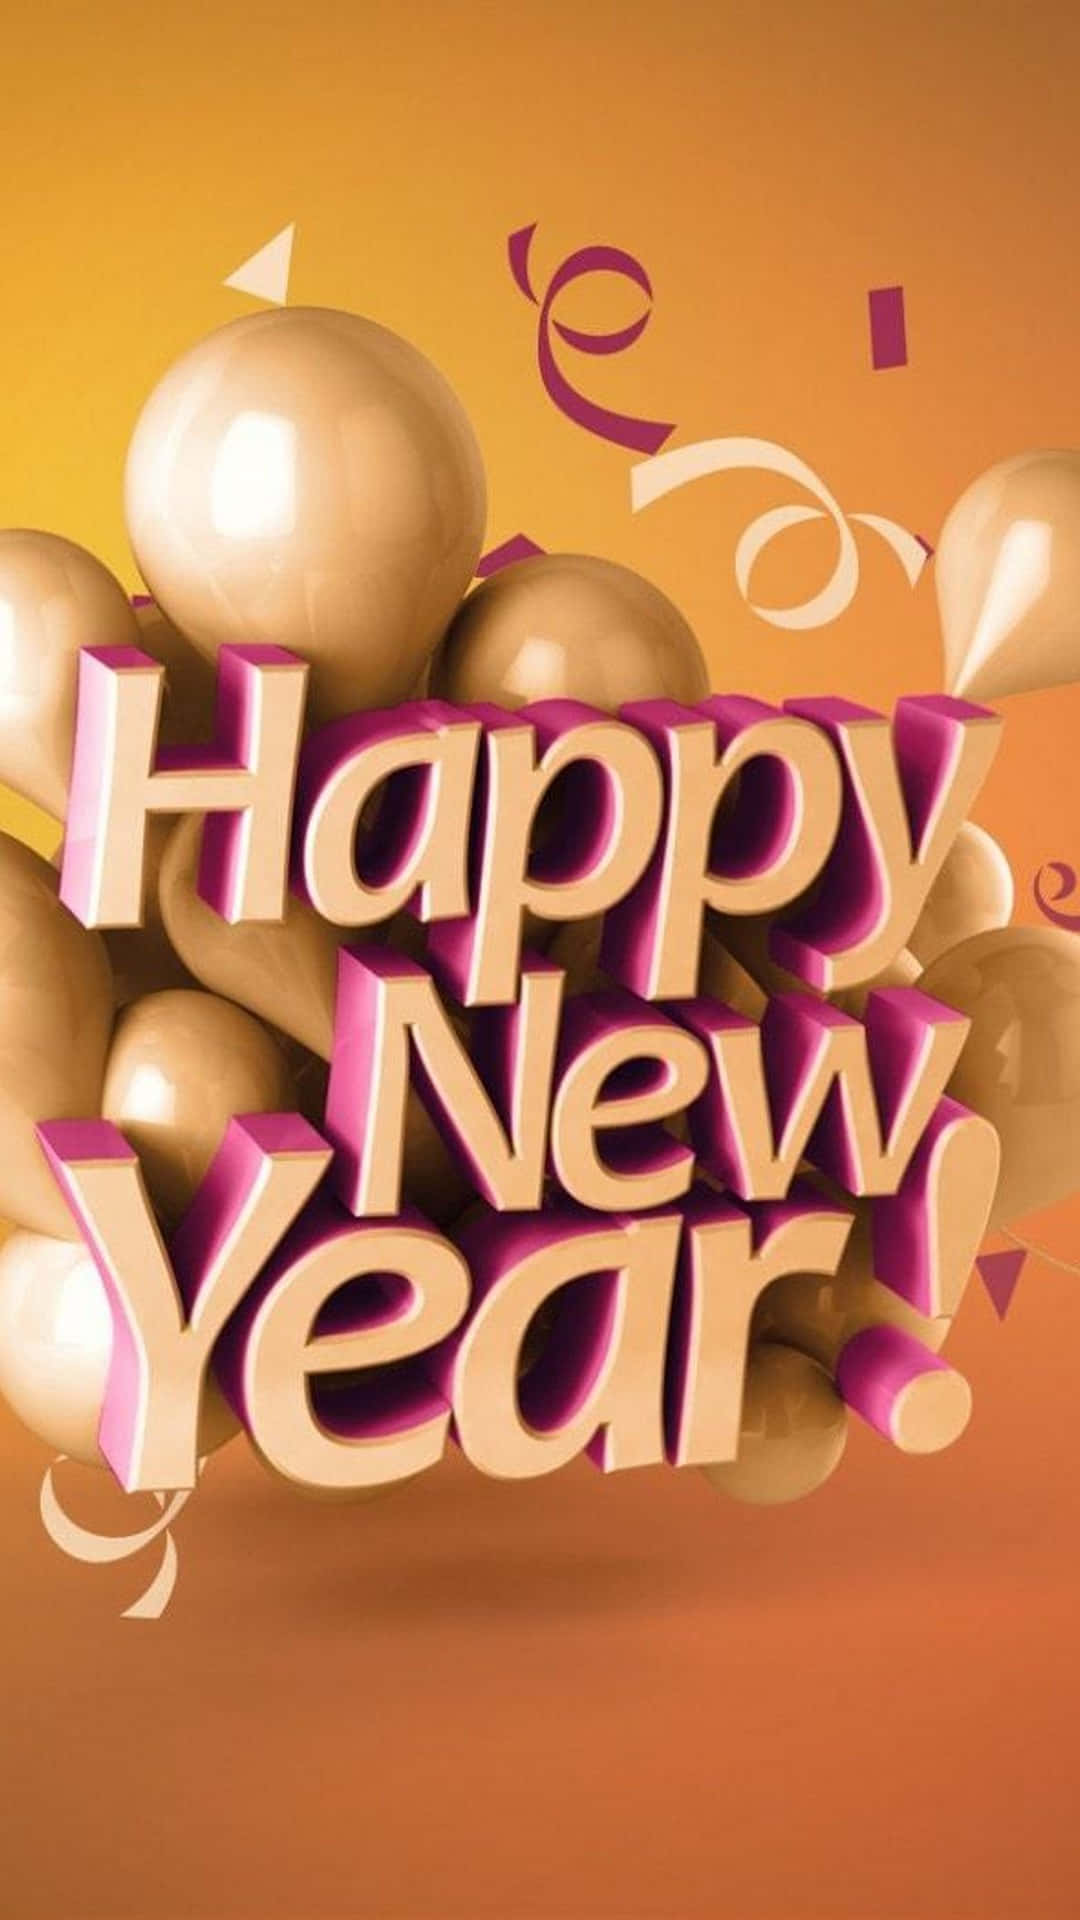 Welcome the New Year with your iPhone! Wallpaper